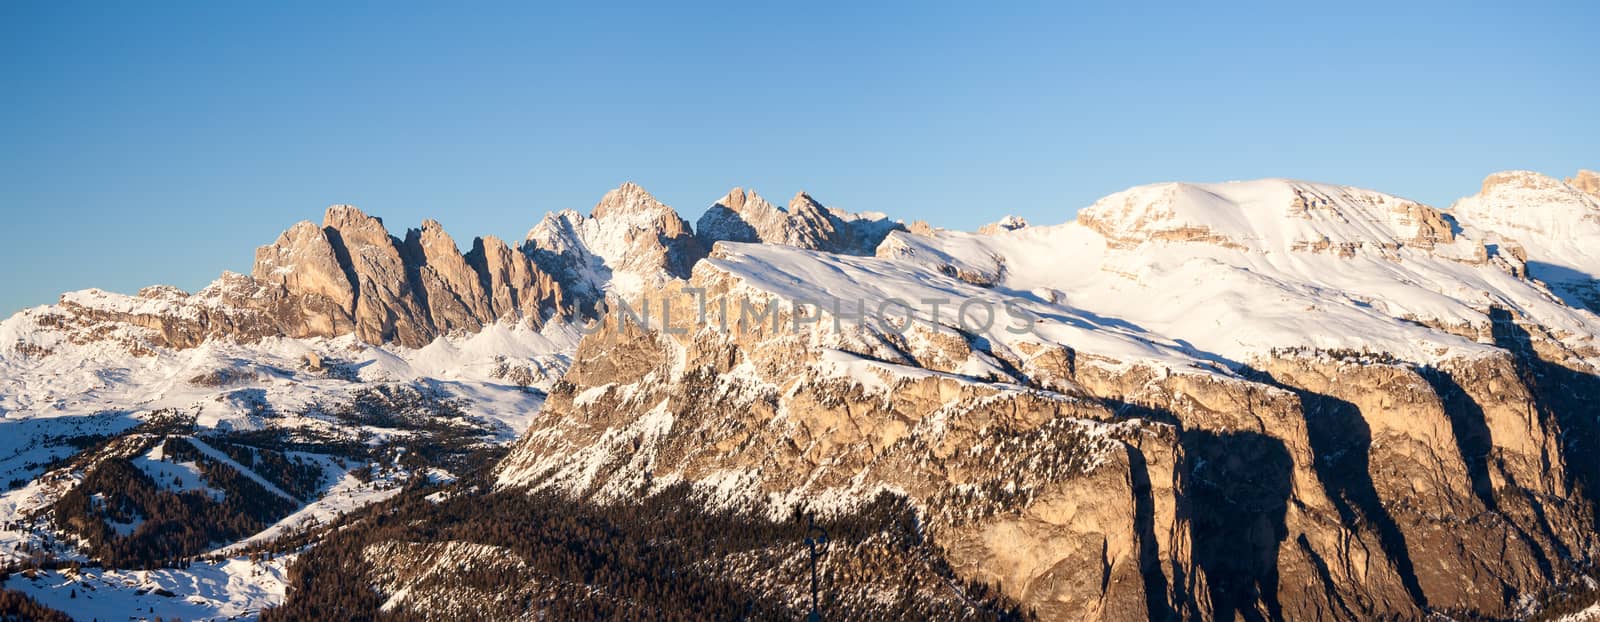 Dolomites winter panorama at the sunset by straannick